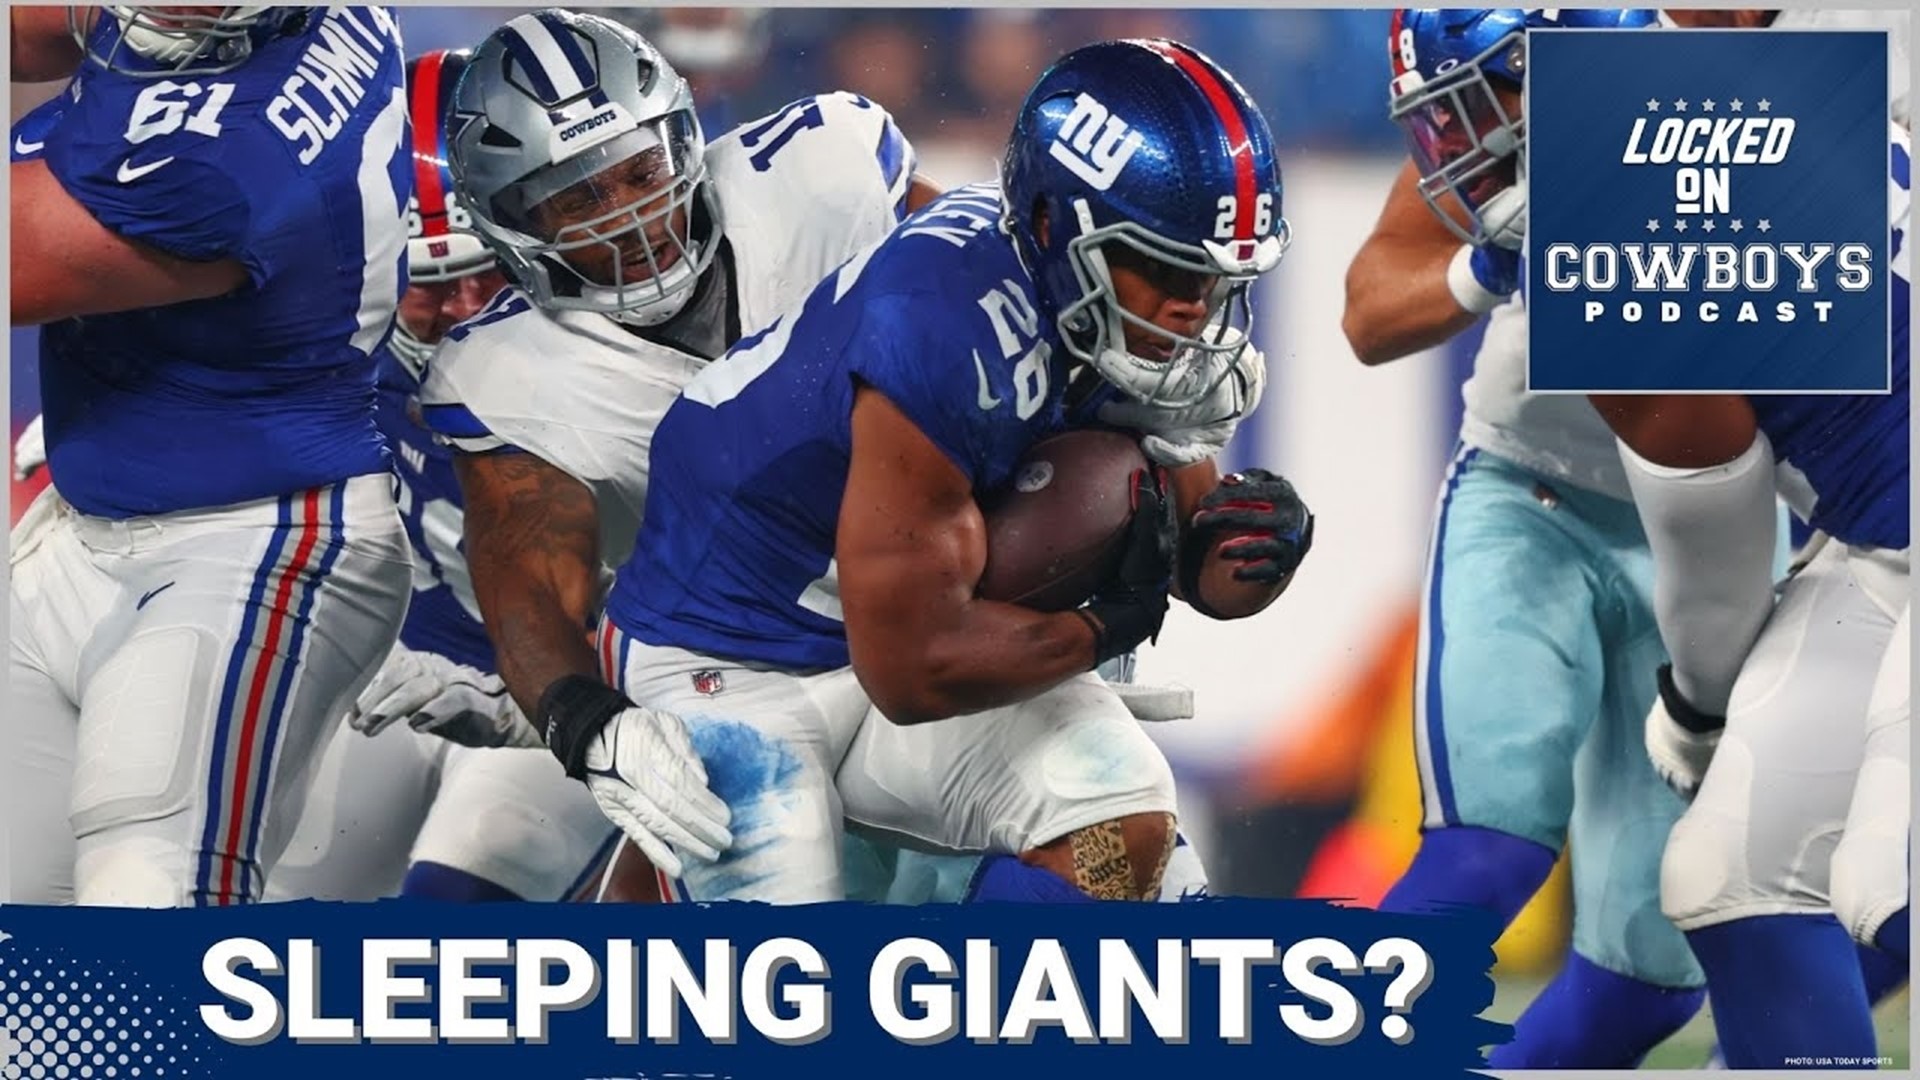 The Dallas Cowboys are 17-point favorites over the New York Giants in Week 10. Is there any chance the Cowboys are overlooking the Giants this week?